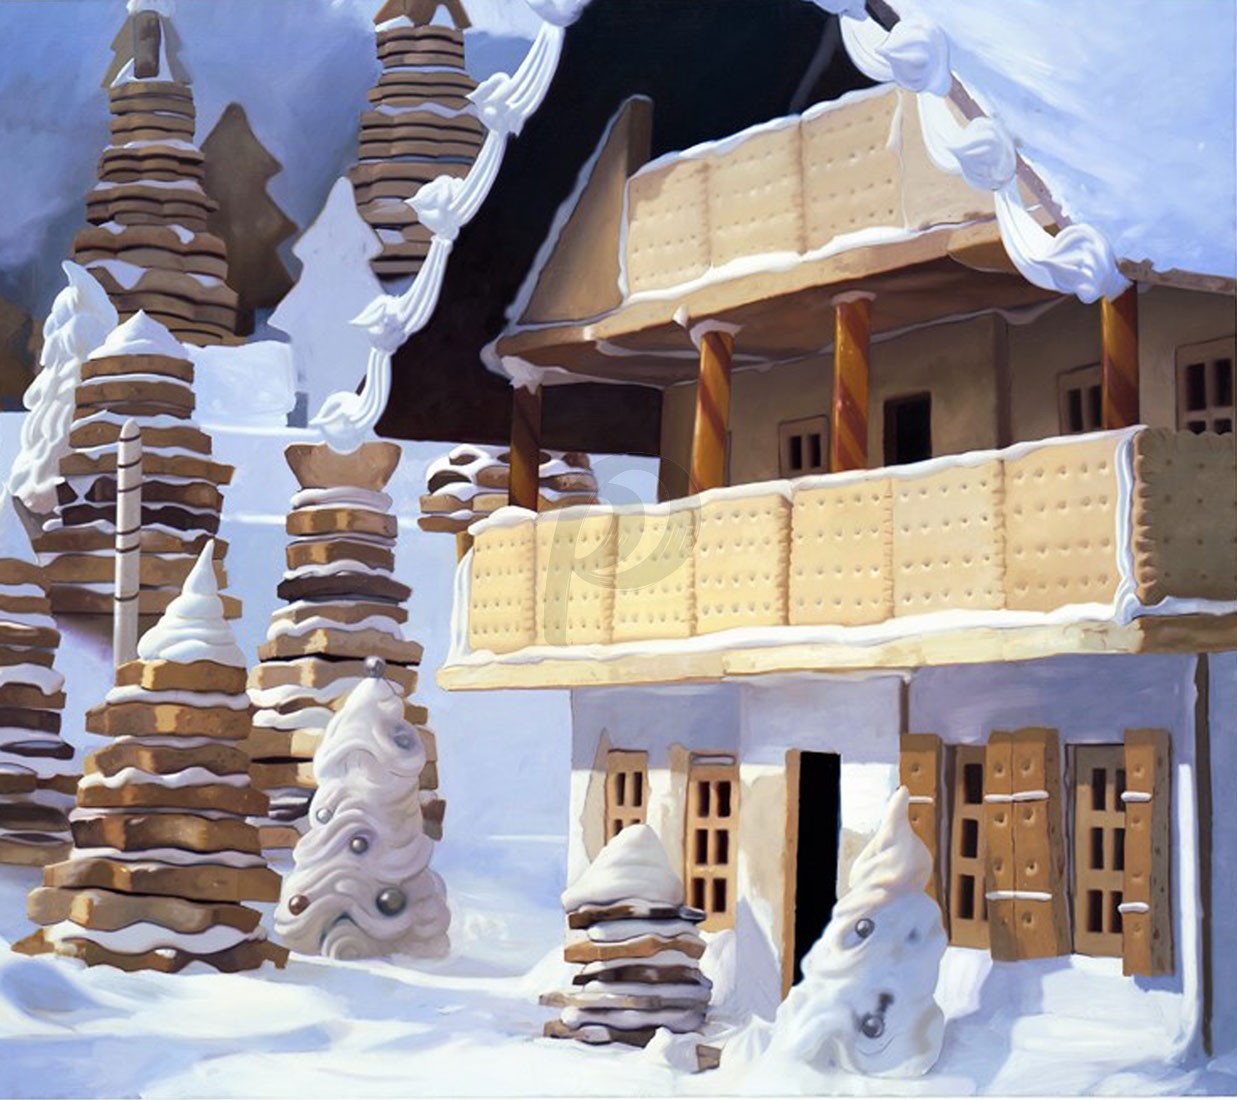 Will Cotton - Chalet (Hand-Painted Reproduction)